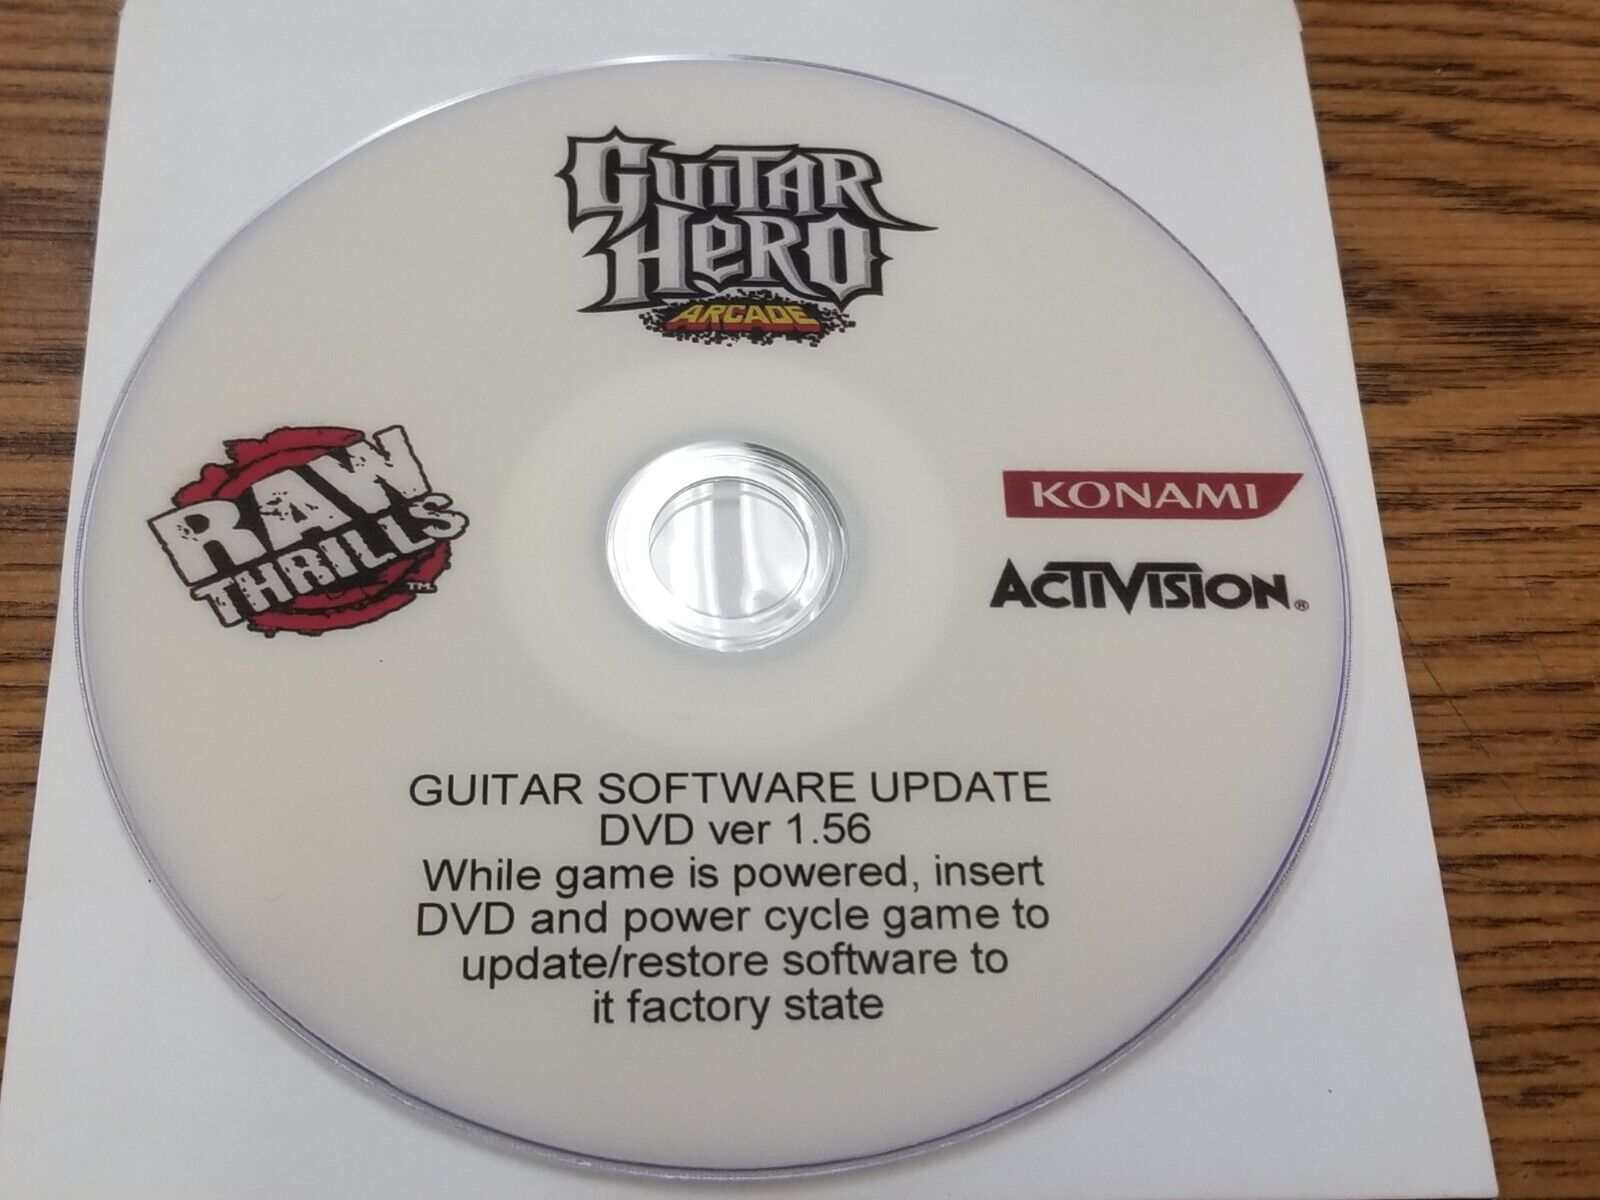 Guitar Hero RAW THRILLS Arcade Restore , Update RECOVERY DISK , V1.56 USED